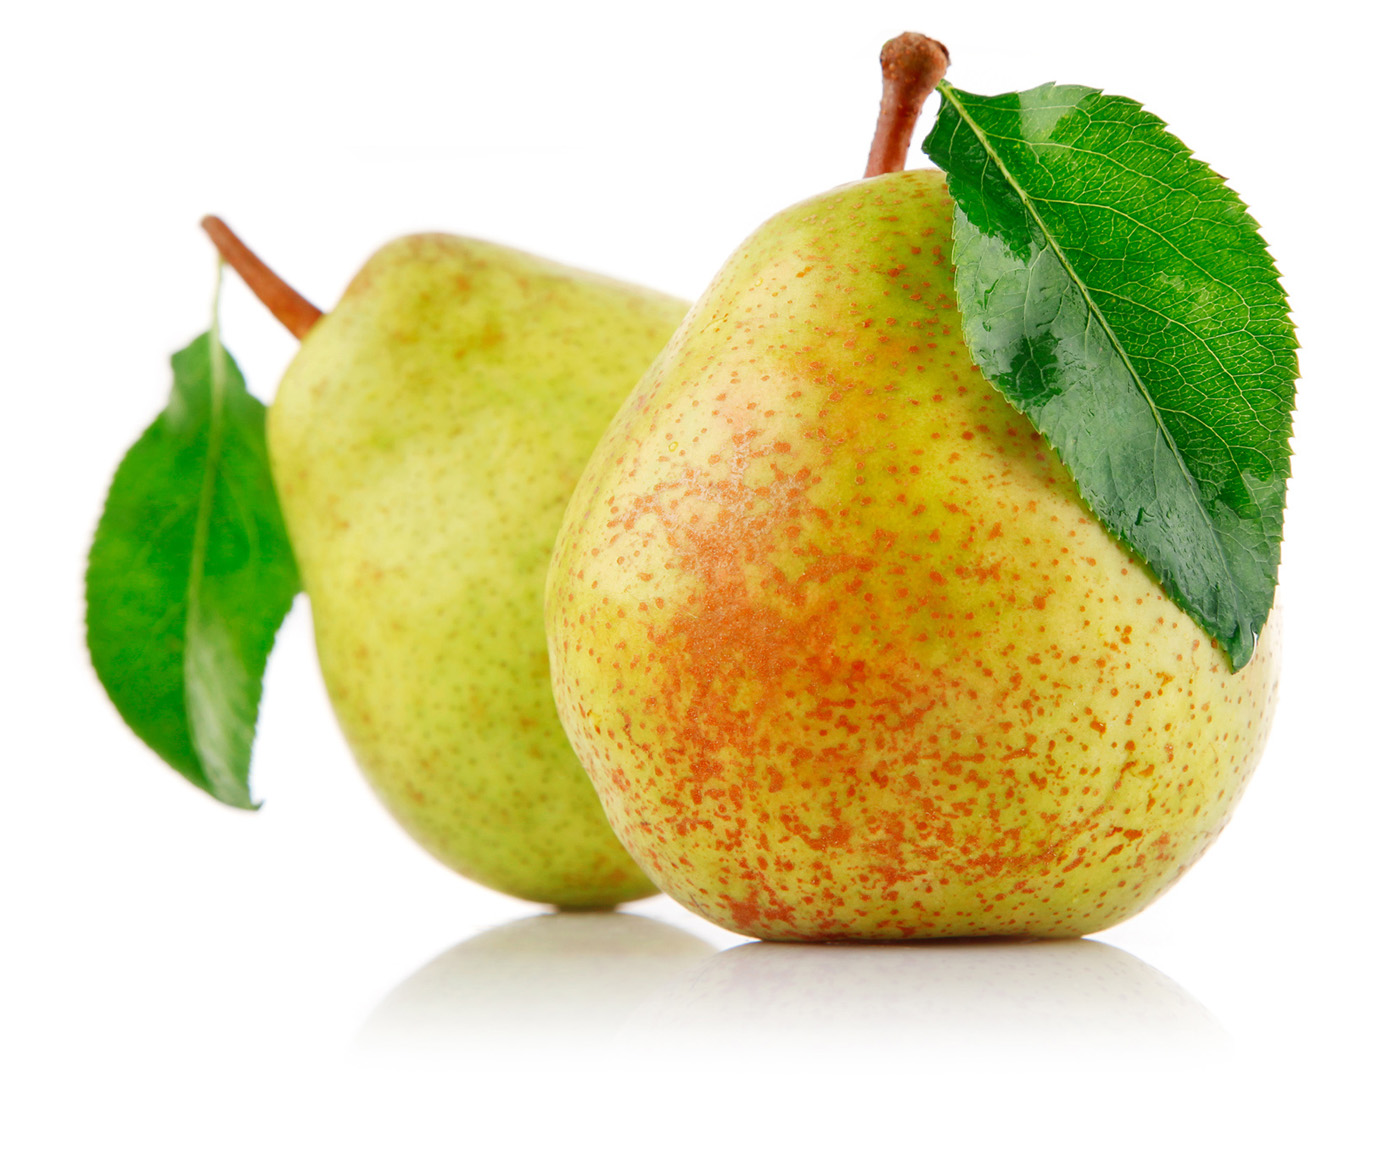 New Images Pear Wallpaper Amazing Pear Images Collection - Wild Pear Png , HD Wallpaper & Backgrounds